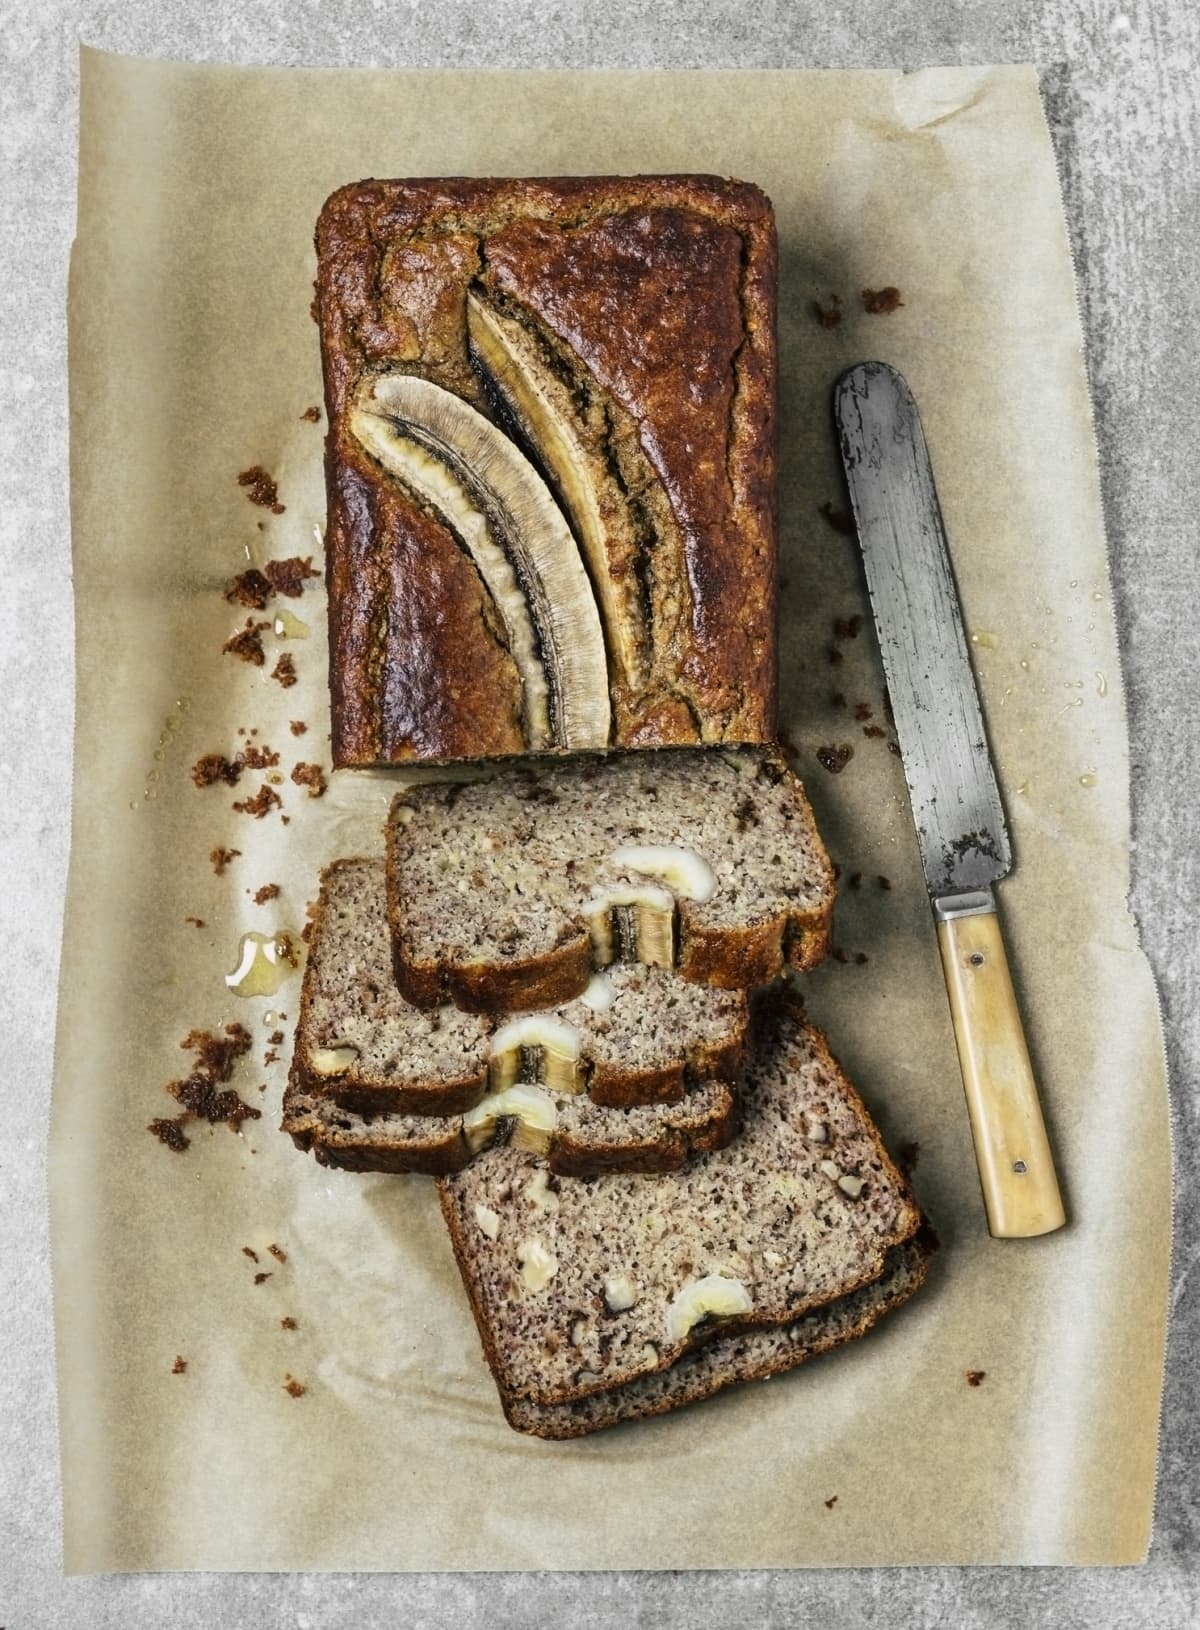 Banana bread sliced on parchment paper with knife